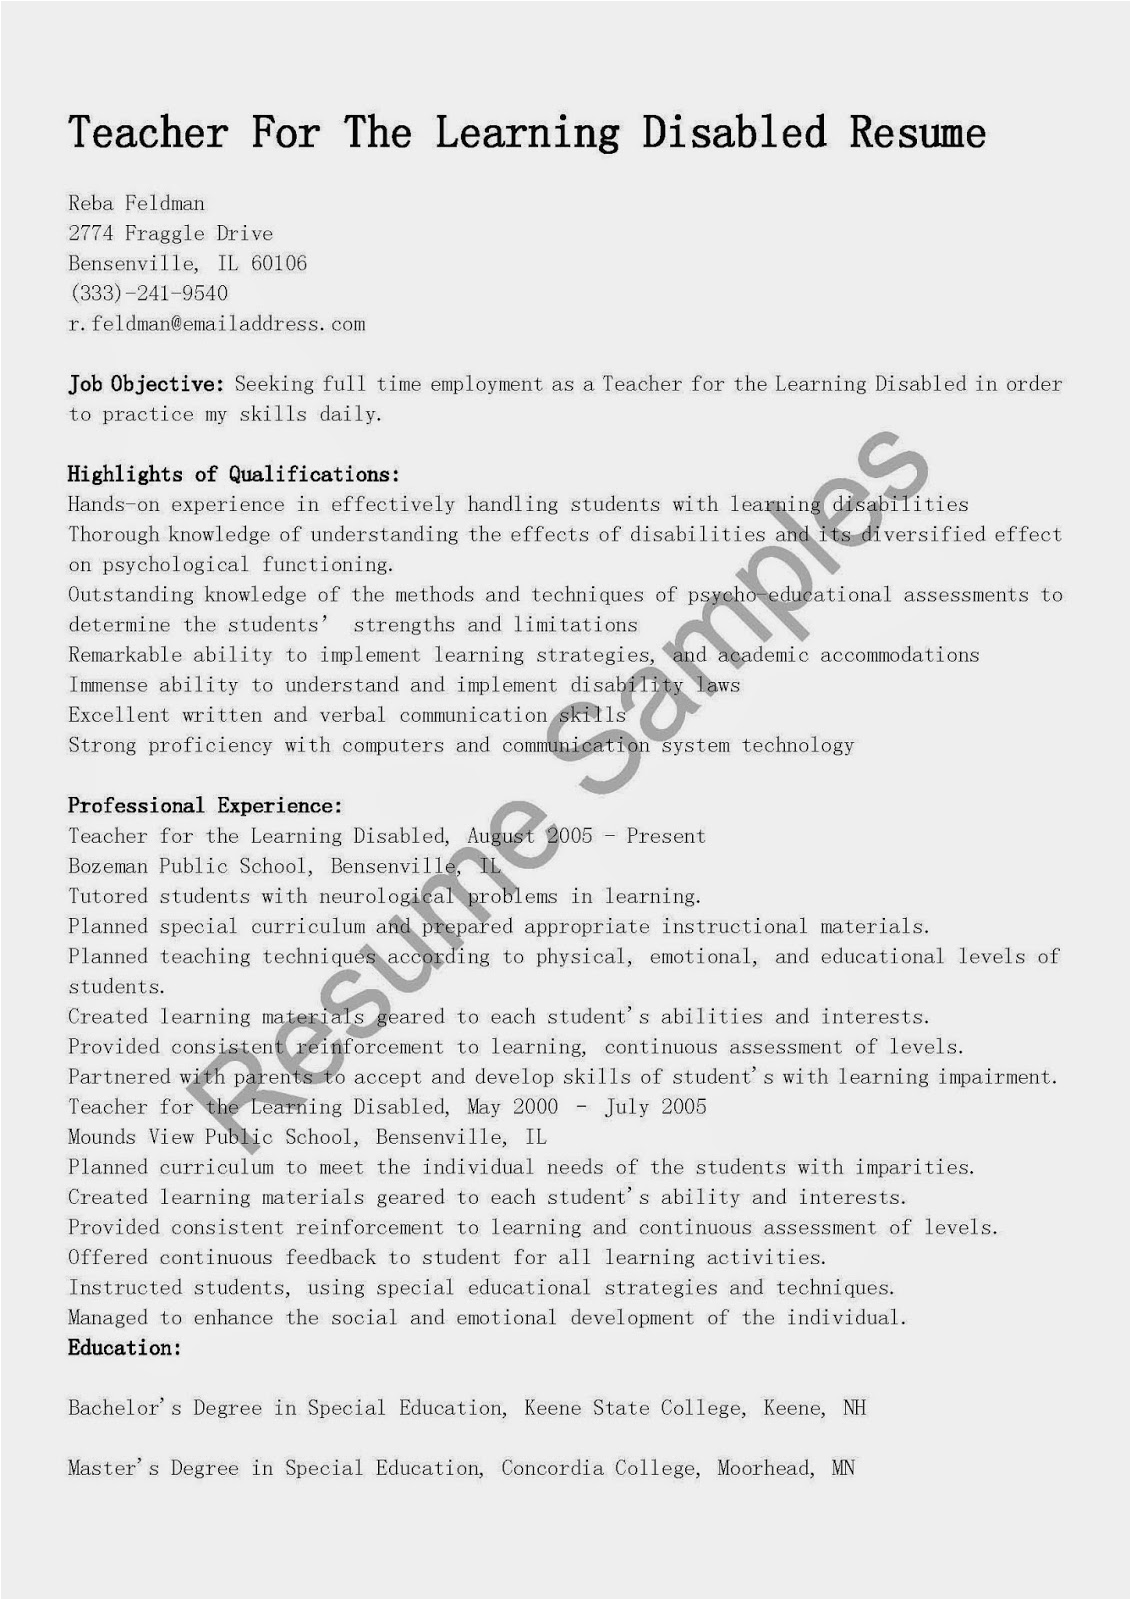 Sample Resume for Working with Developmental Disabilities Resume Samples Teacher for the Learning Disabled Resume